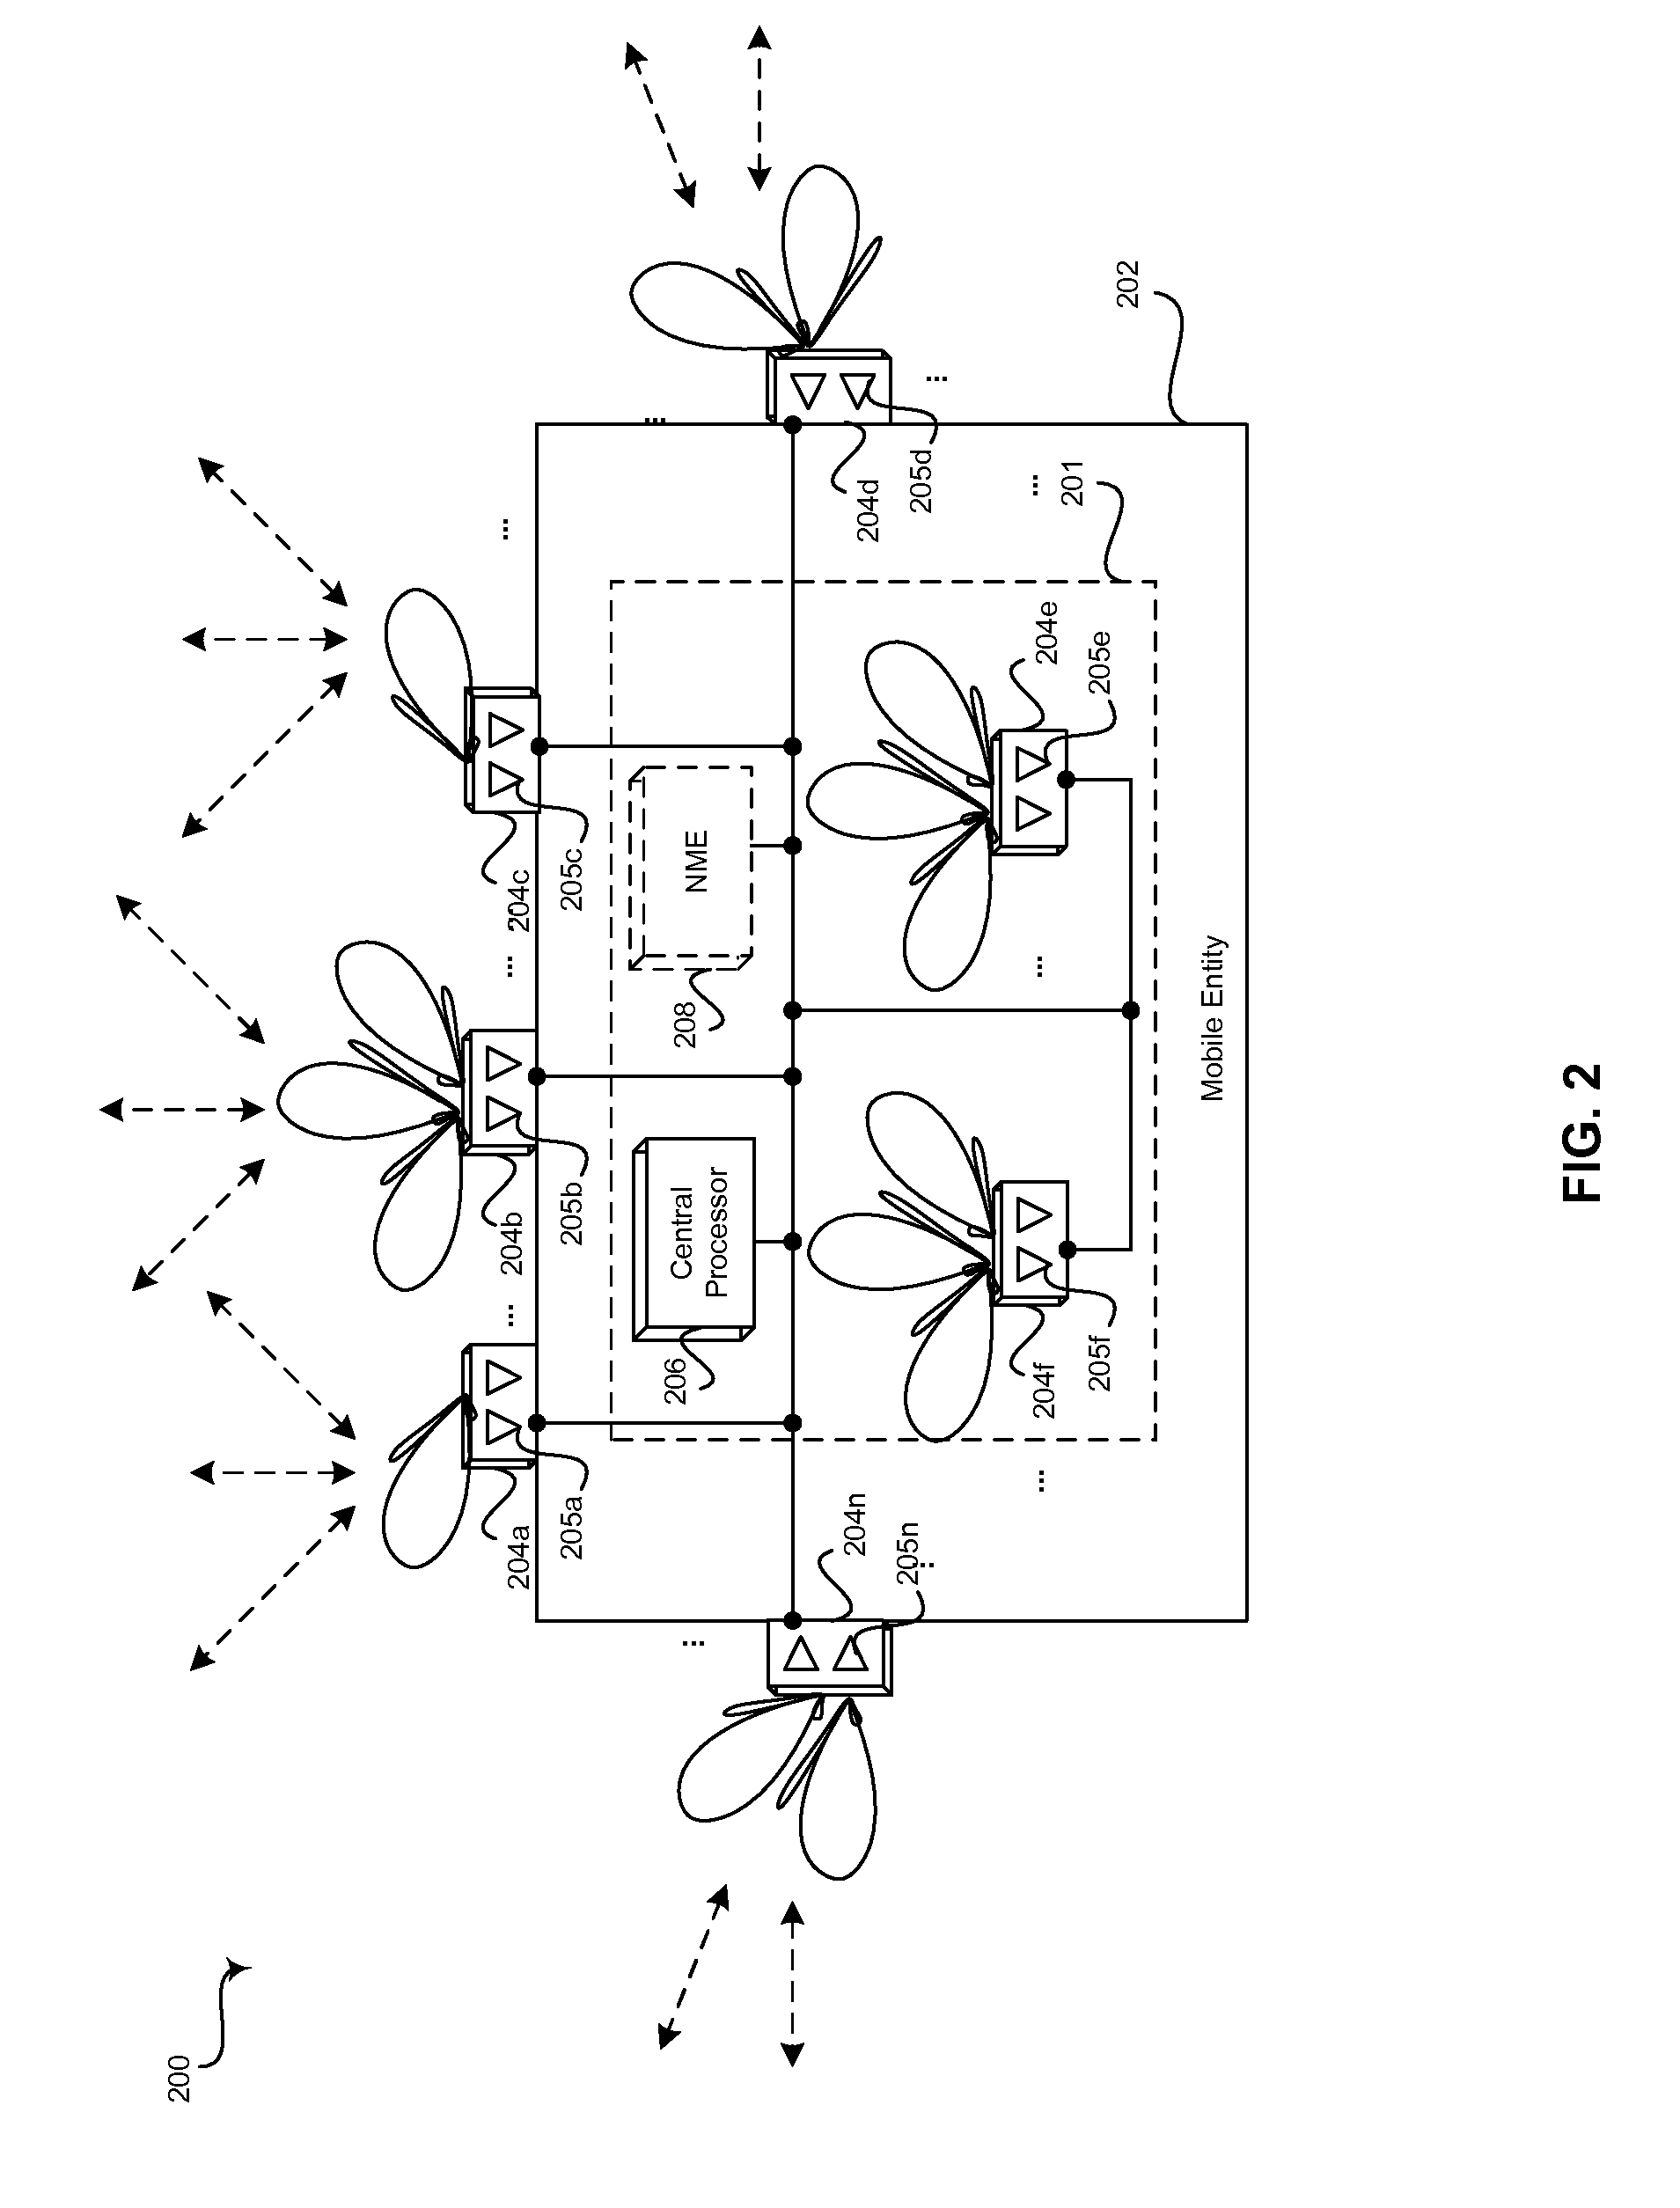 Method and system for distributed transceivers and mobile device connectivity